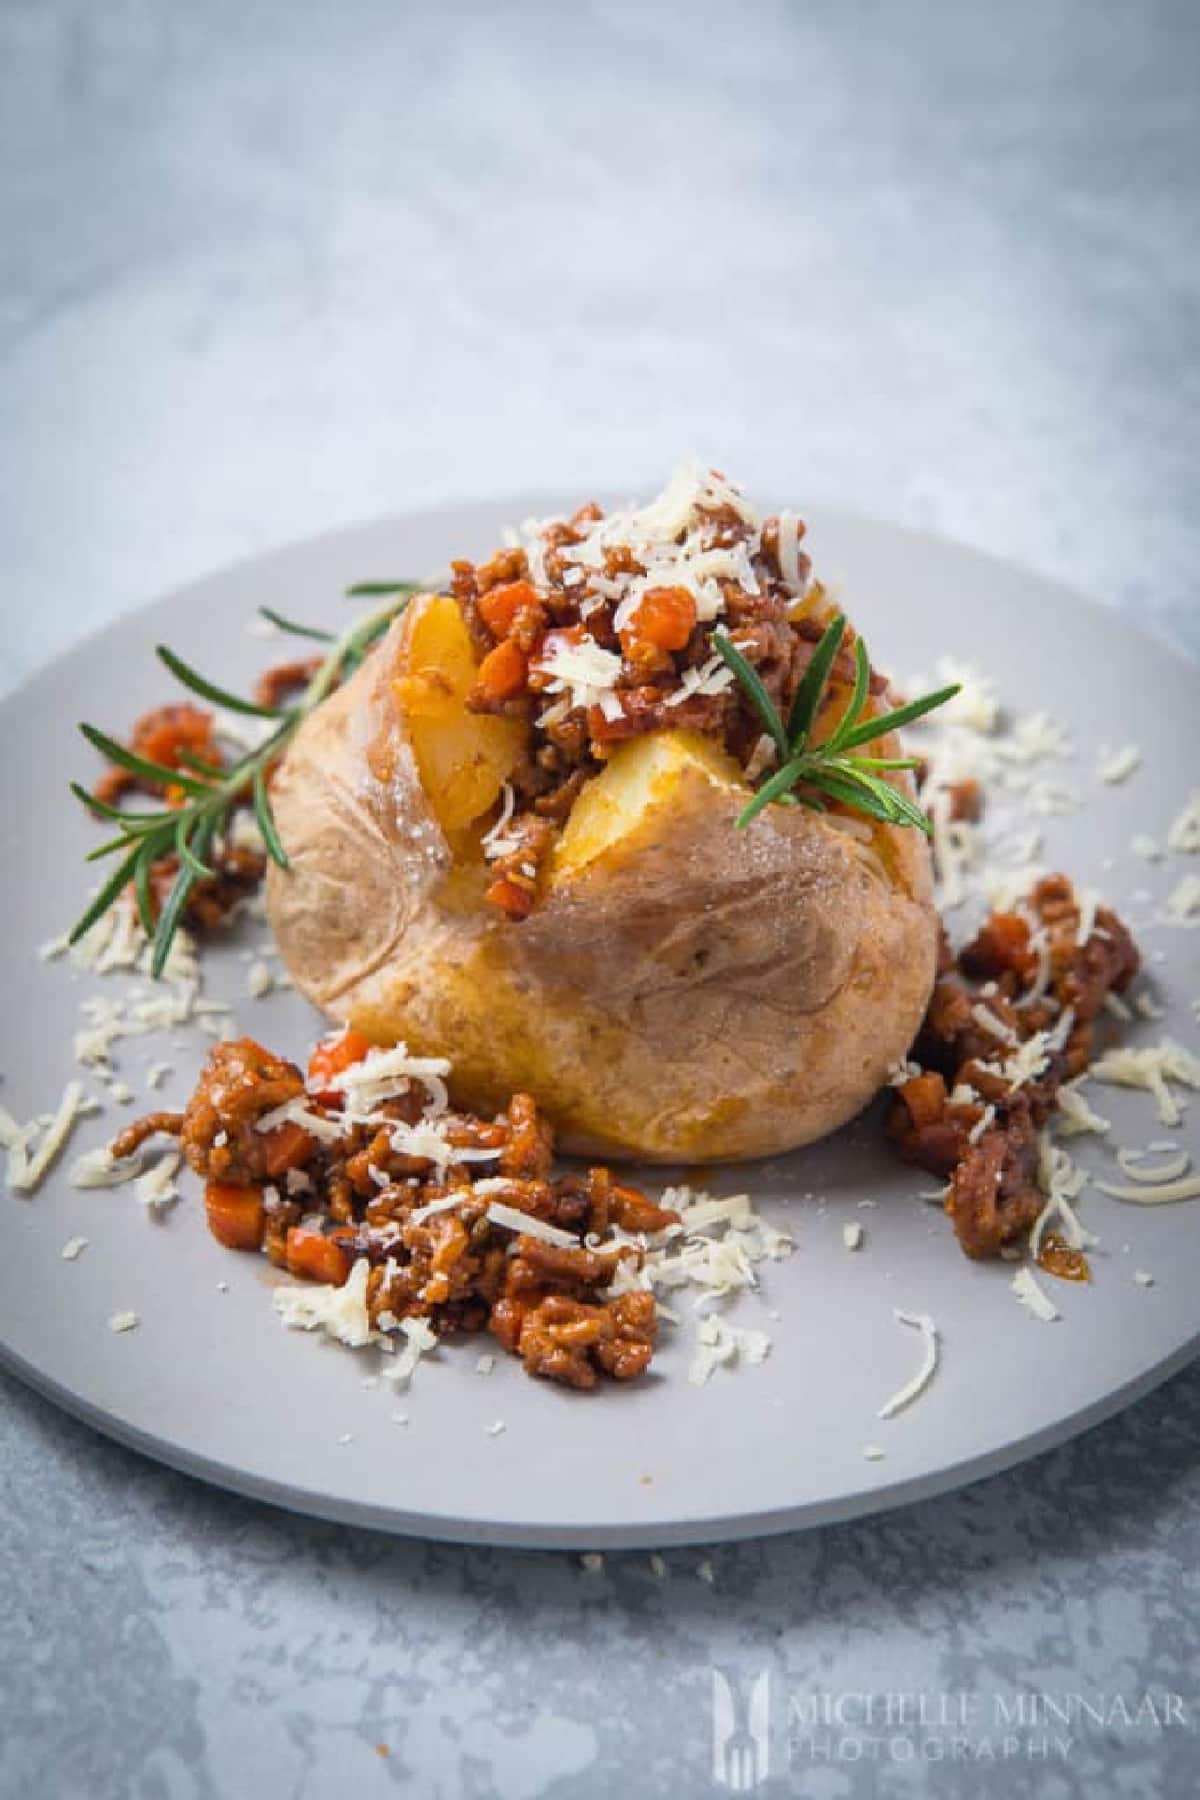 Savoury Mince Fill Baked Jacket Potatoes on a white plate with rosemary garnish.